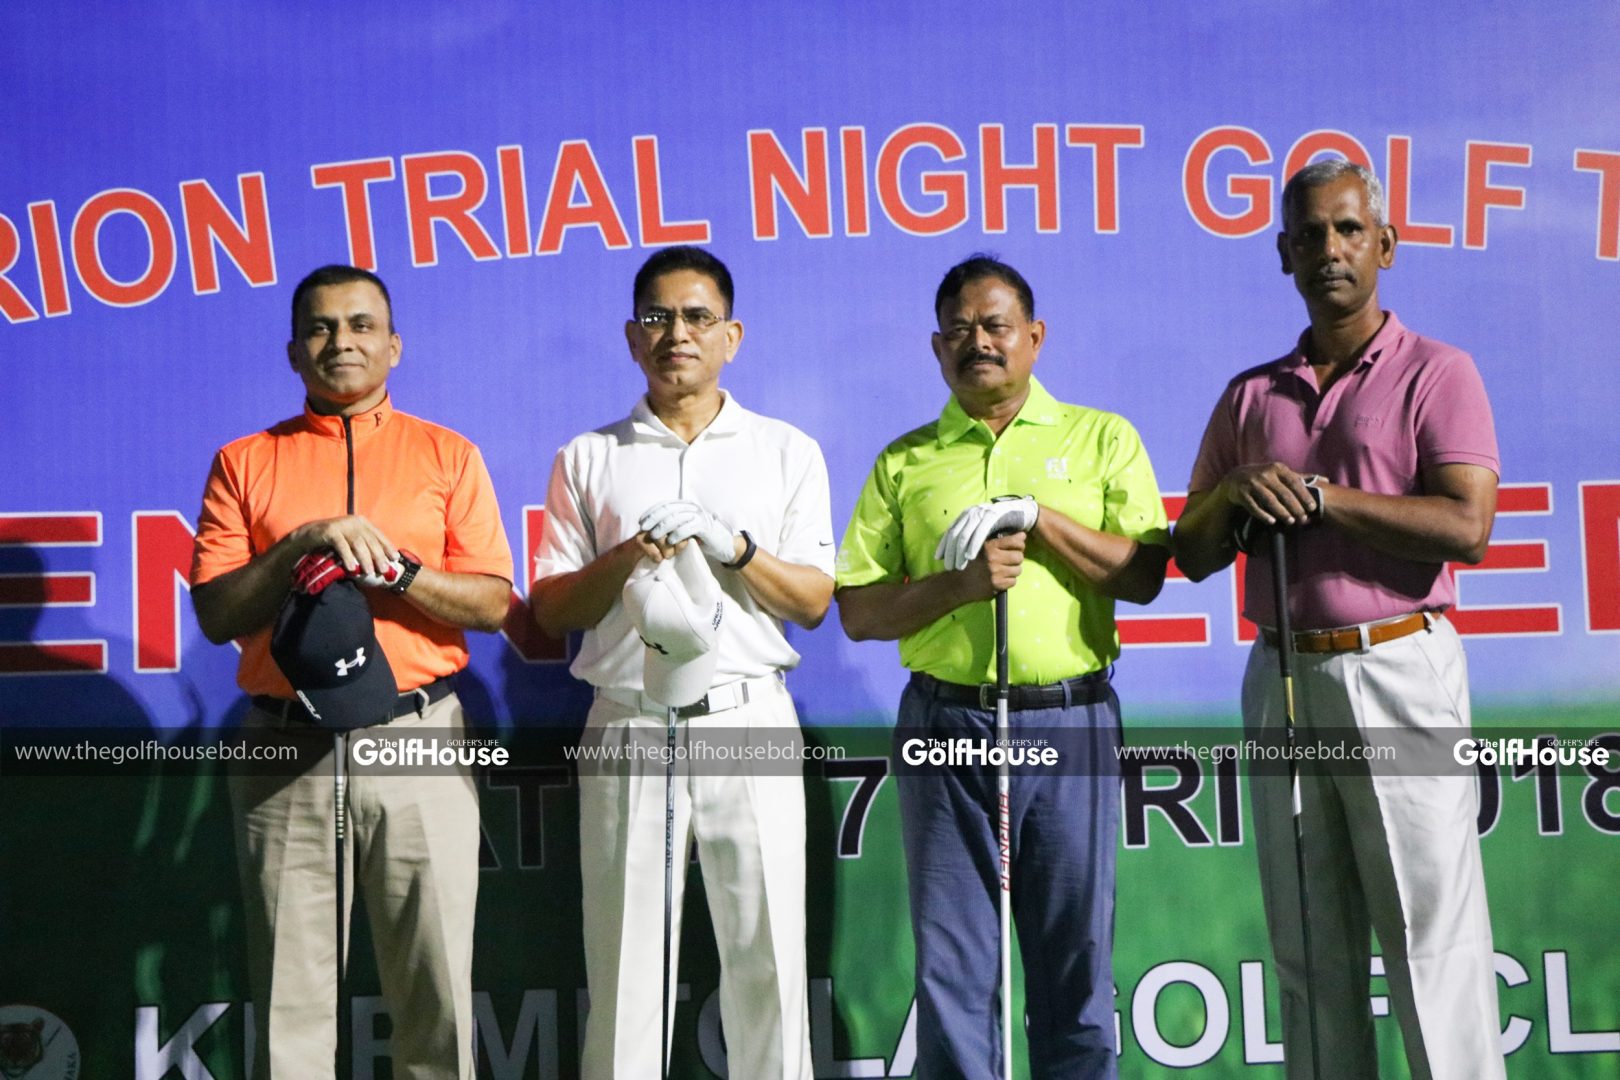 Tele Tell-Orion Trial Night Golf Tournament 2018 was held at KGC, Dhaka on April 17, 2018. A total 49 golfers played the trial night golf tournament. 